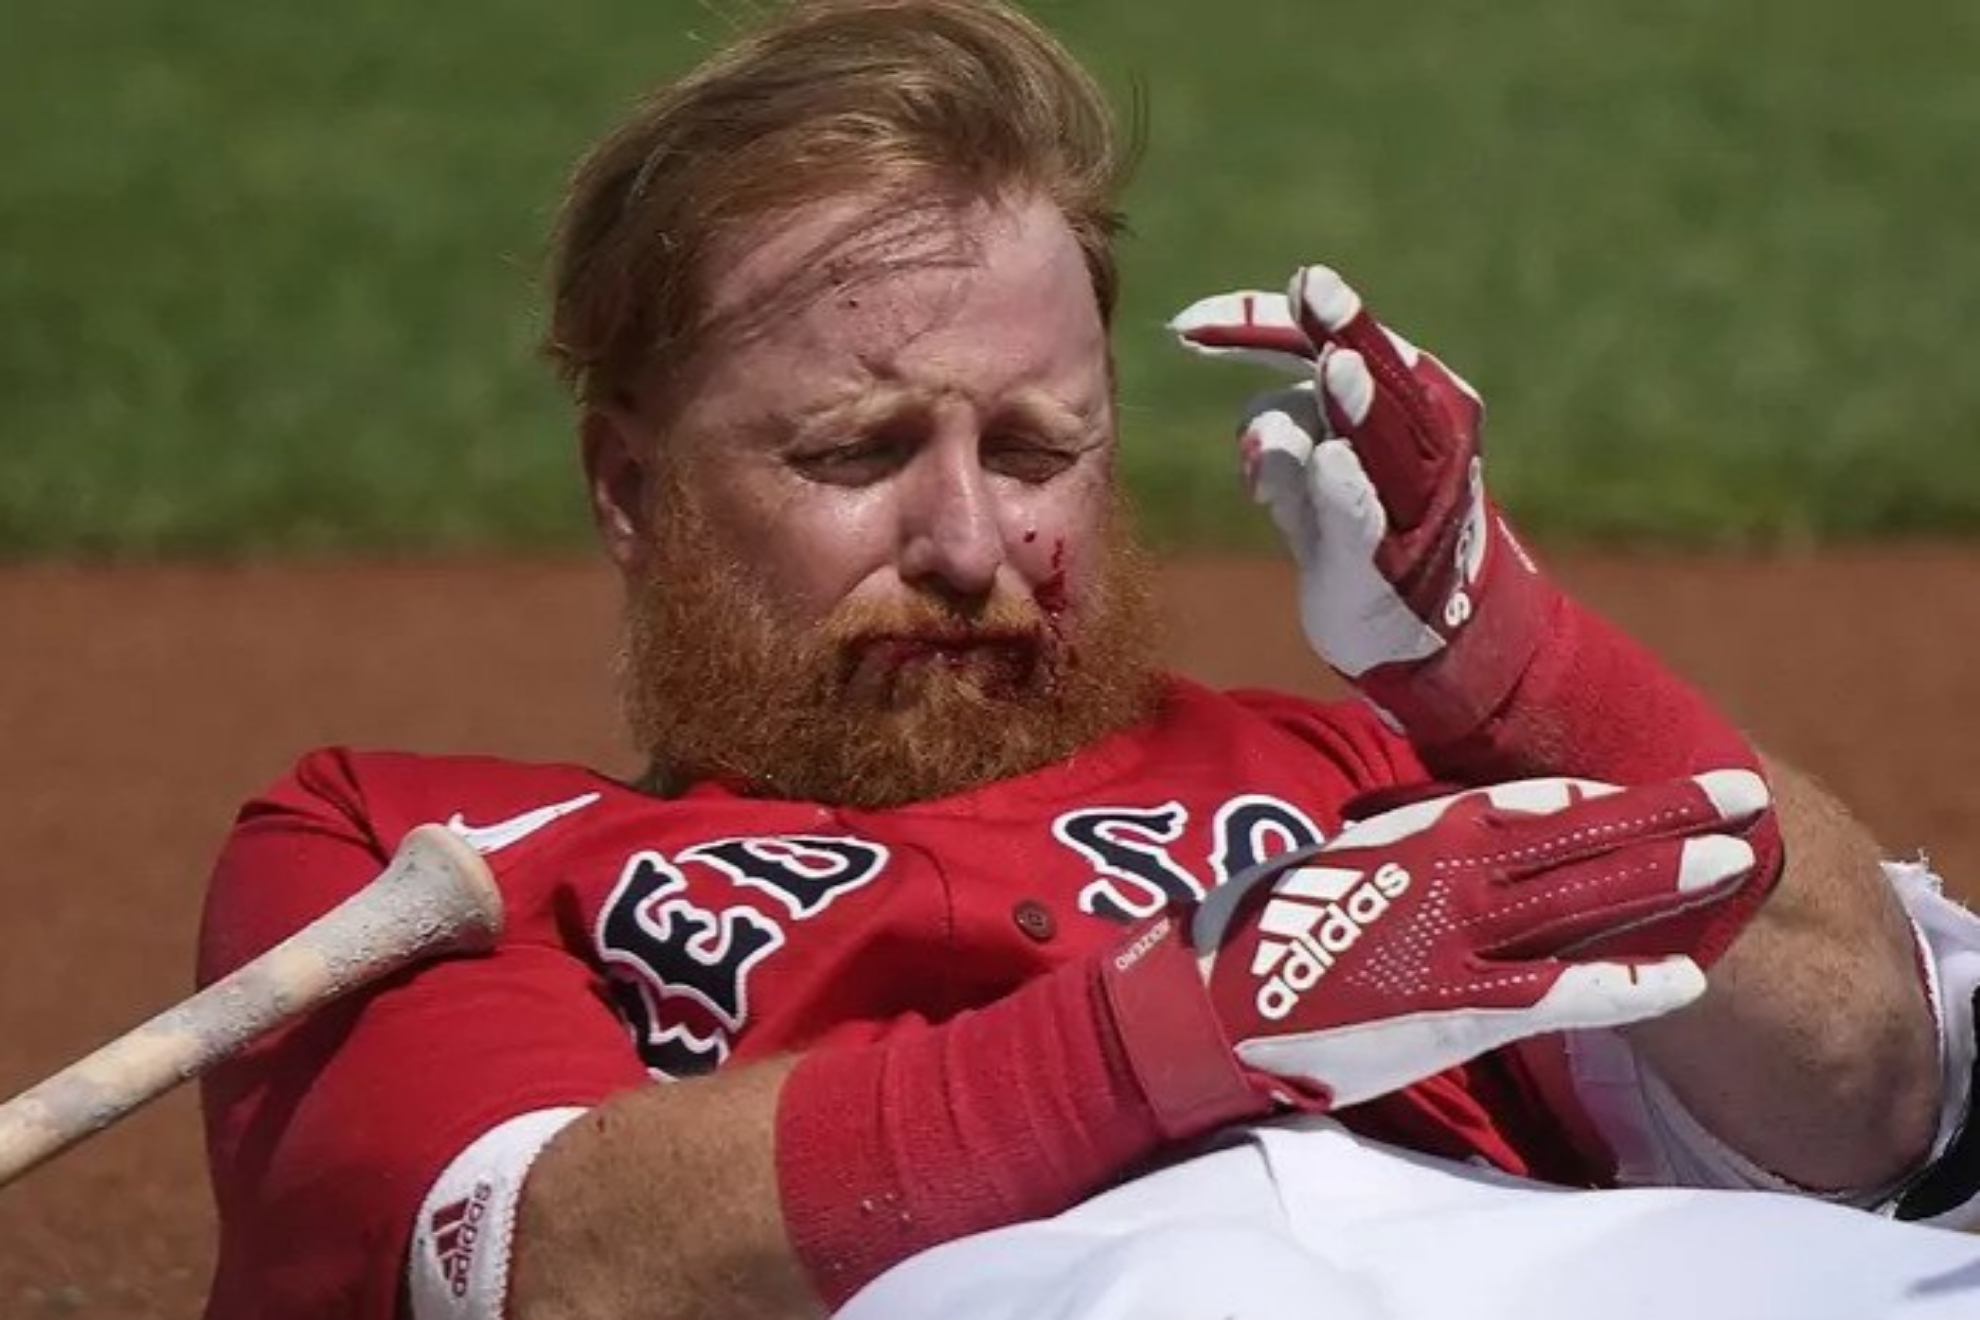 Justin Turner gets hit in the face by a pitch and is taken to hospital